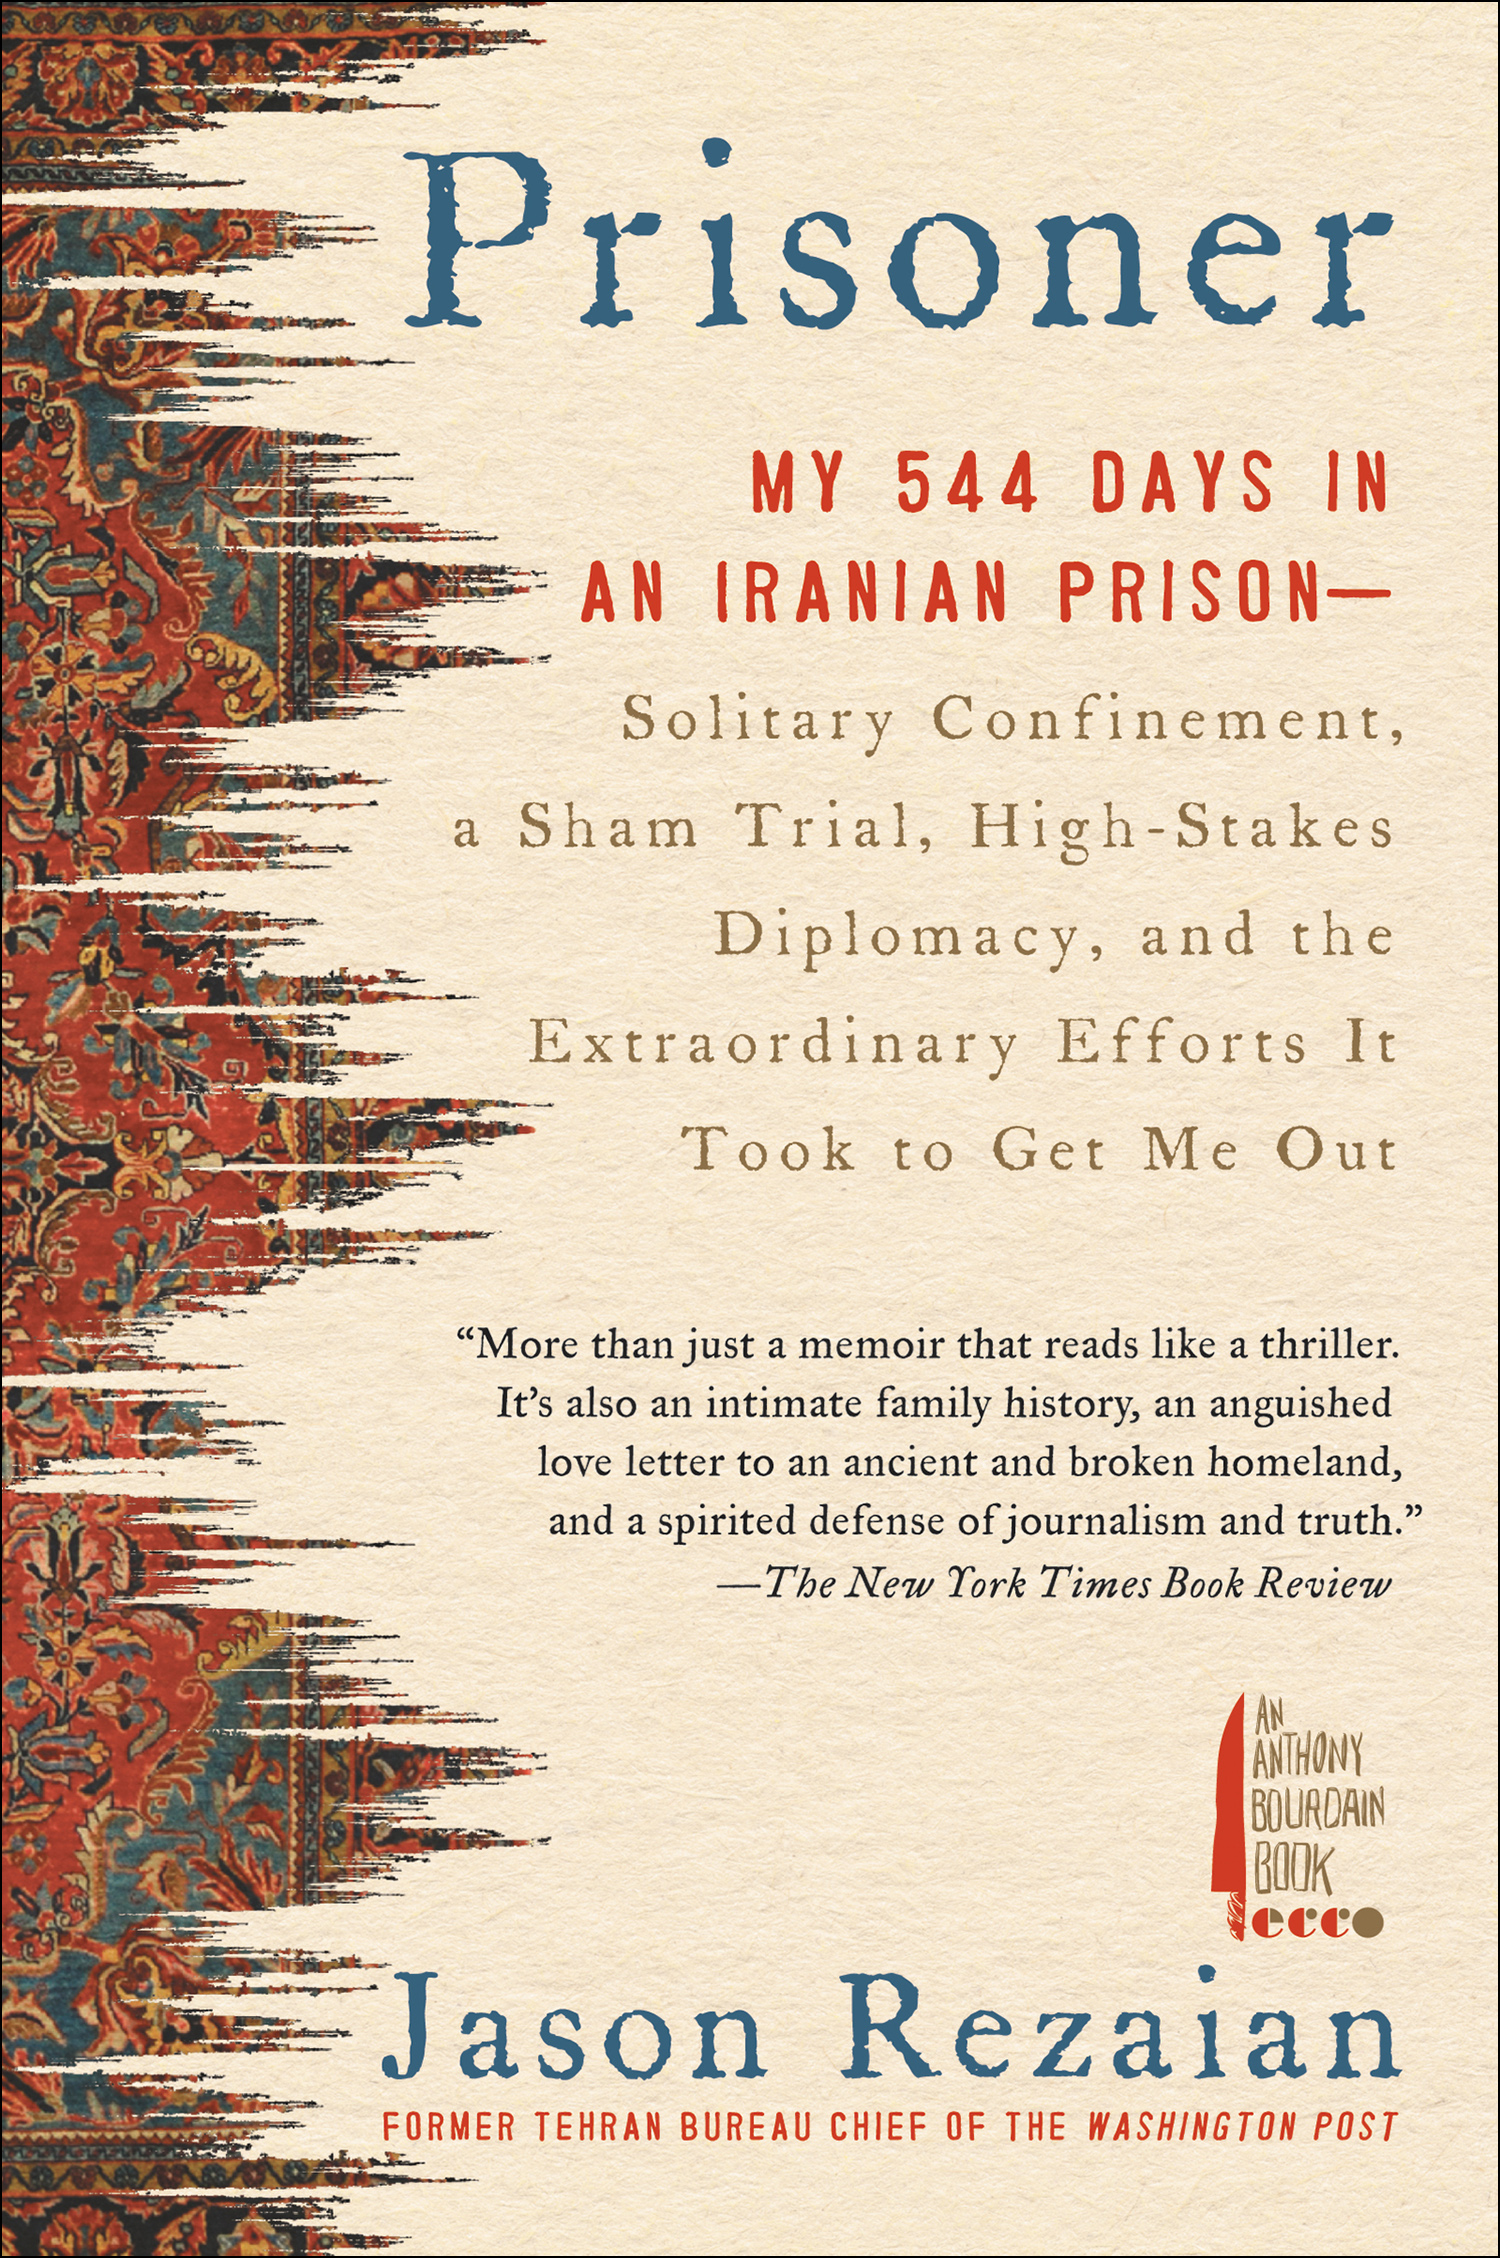 Imagen de portada para Prisoner [electronic resource] : My 544 Days in an Iranian Prison--Solitary Confinement, a Sham Trial, High-Stakes Diplomacy, and the Extraordinary Efforts It Took to Get Me Out